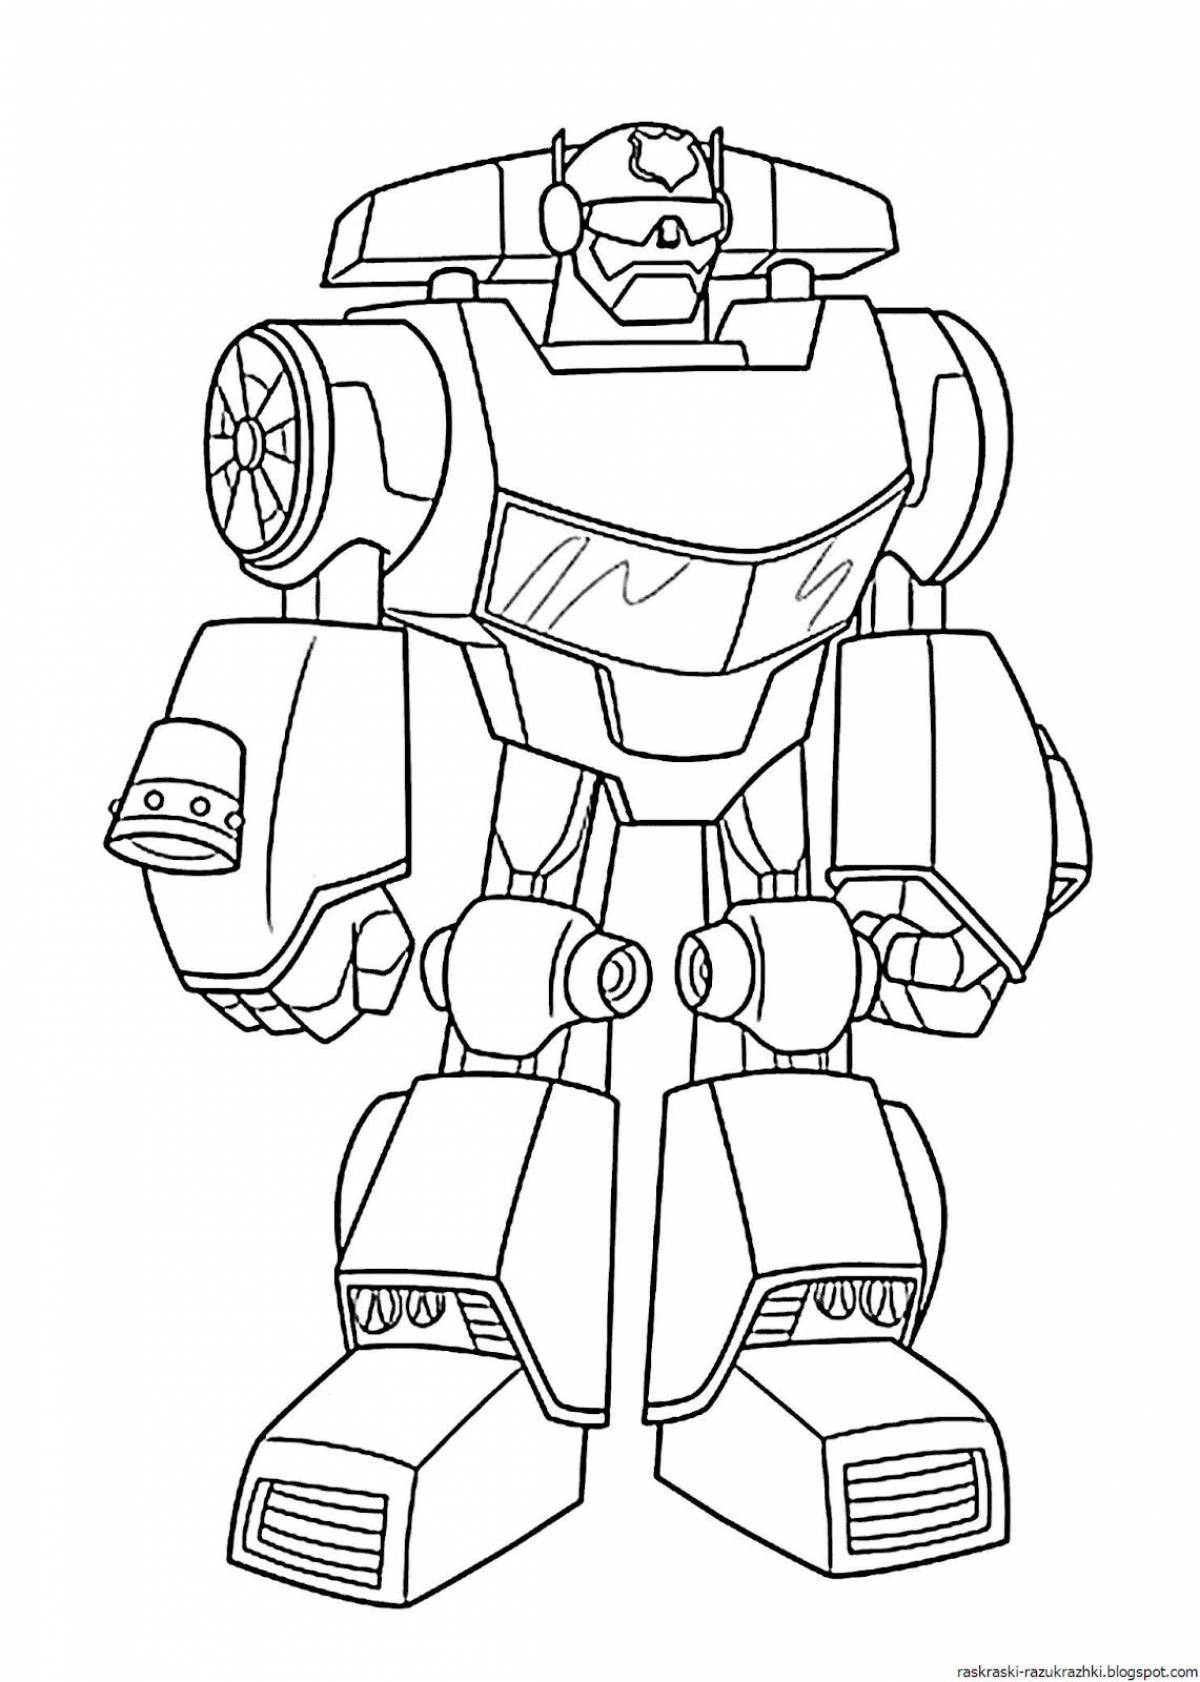 Innovative Transforming Robot Coloring Page